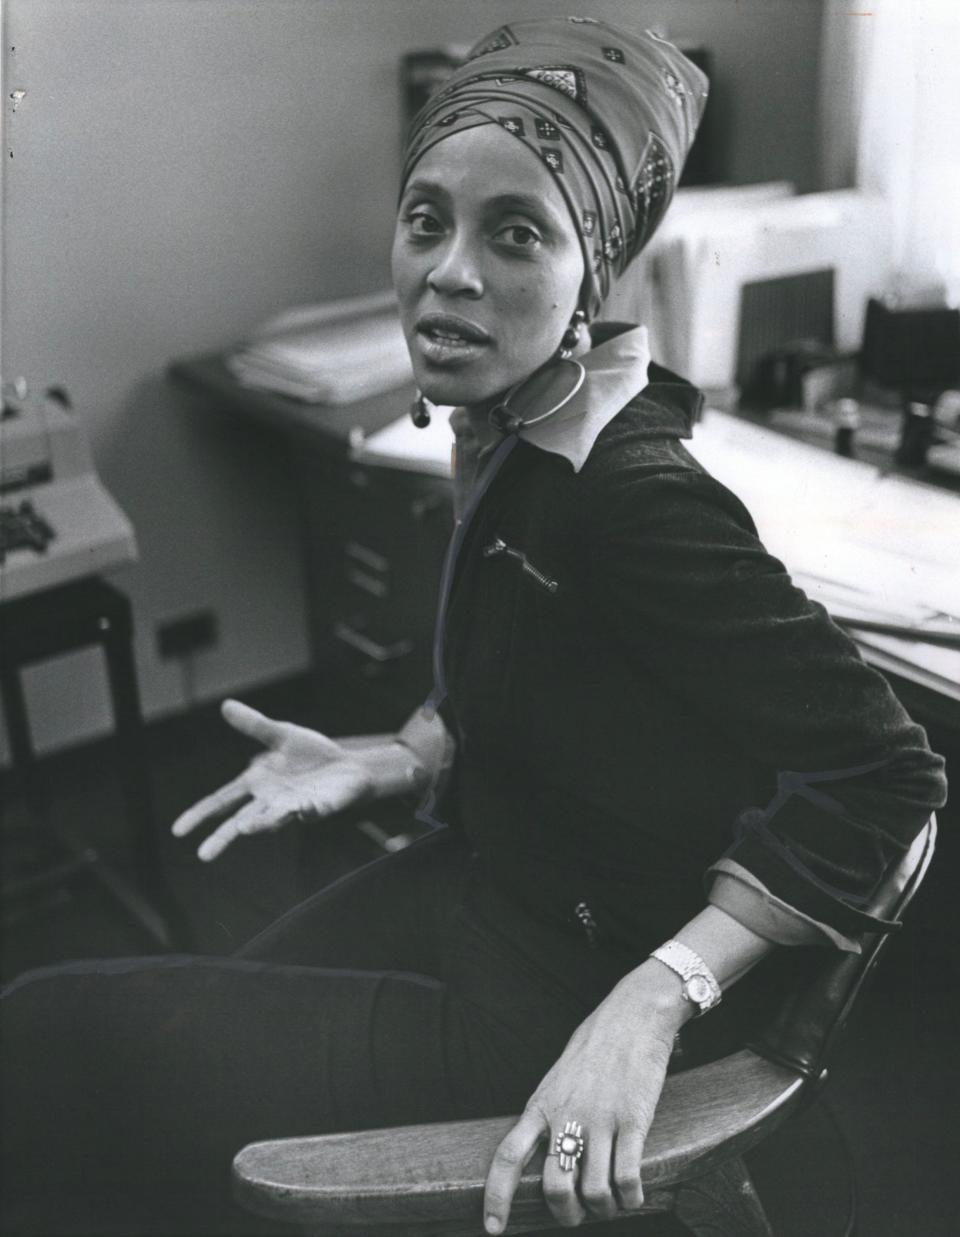 Dr. Geneva Smitherman in 1978, around the time she was called as an expert in the Student Advocacy Center's lawsuit against Ann Arbor Public Schools.